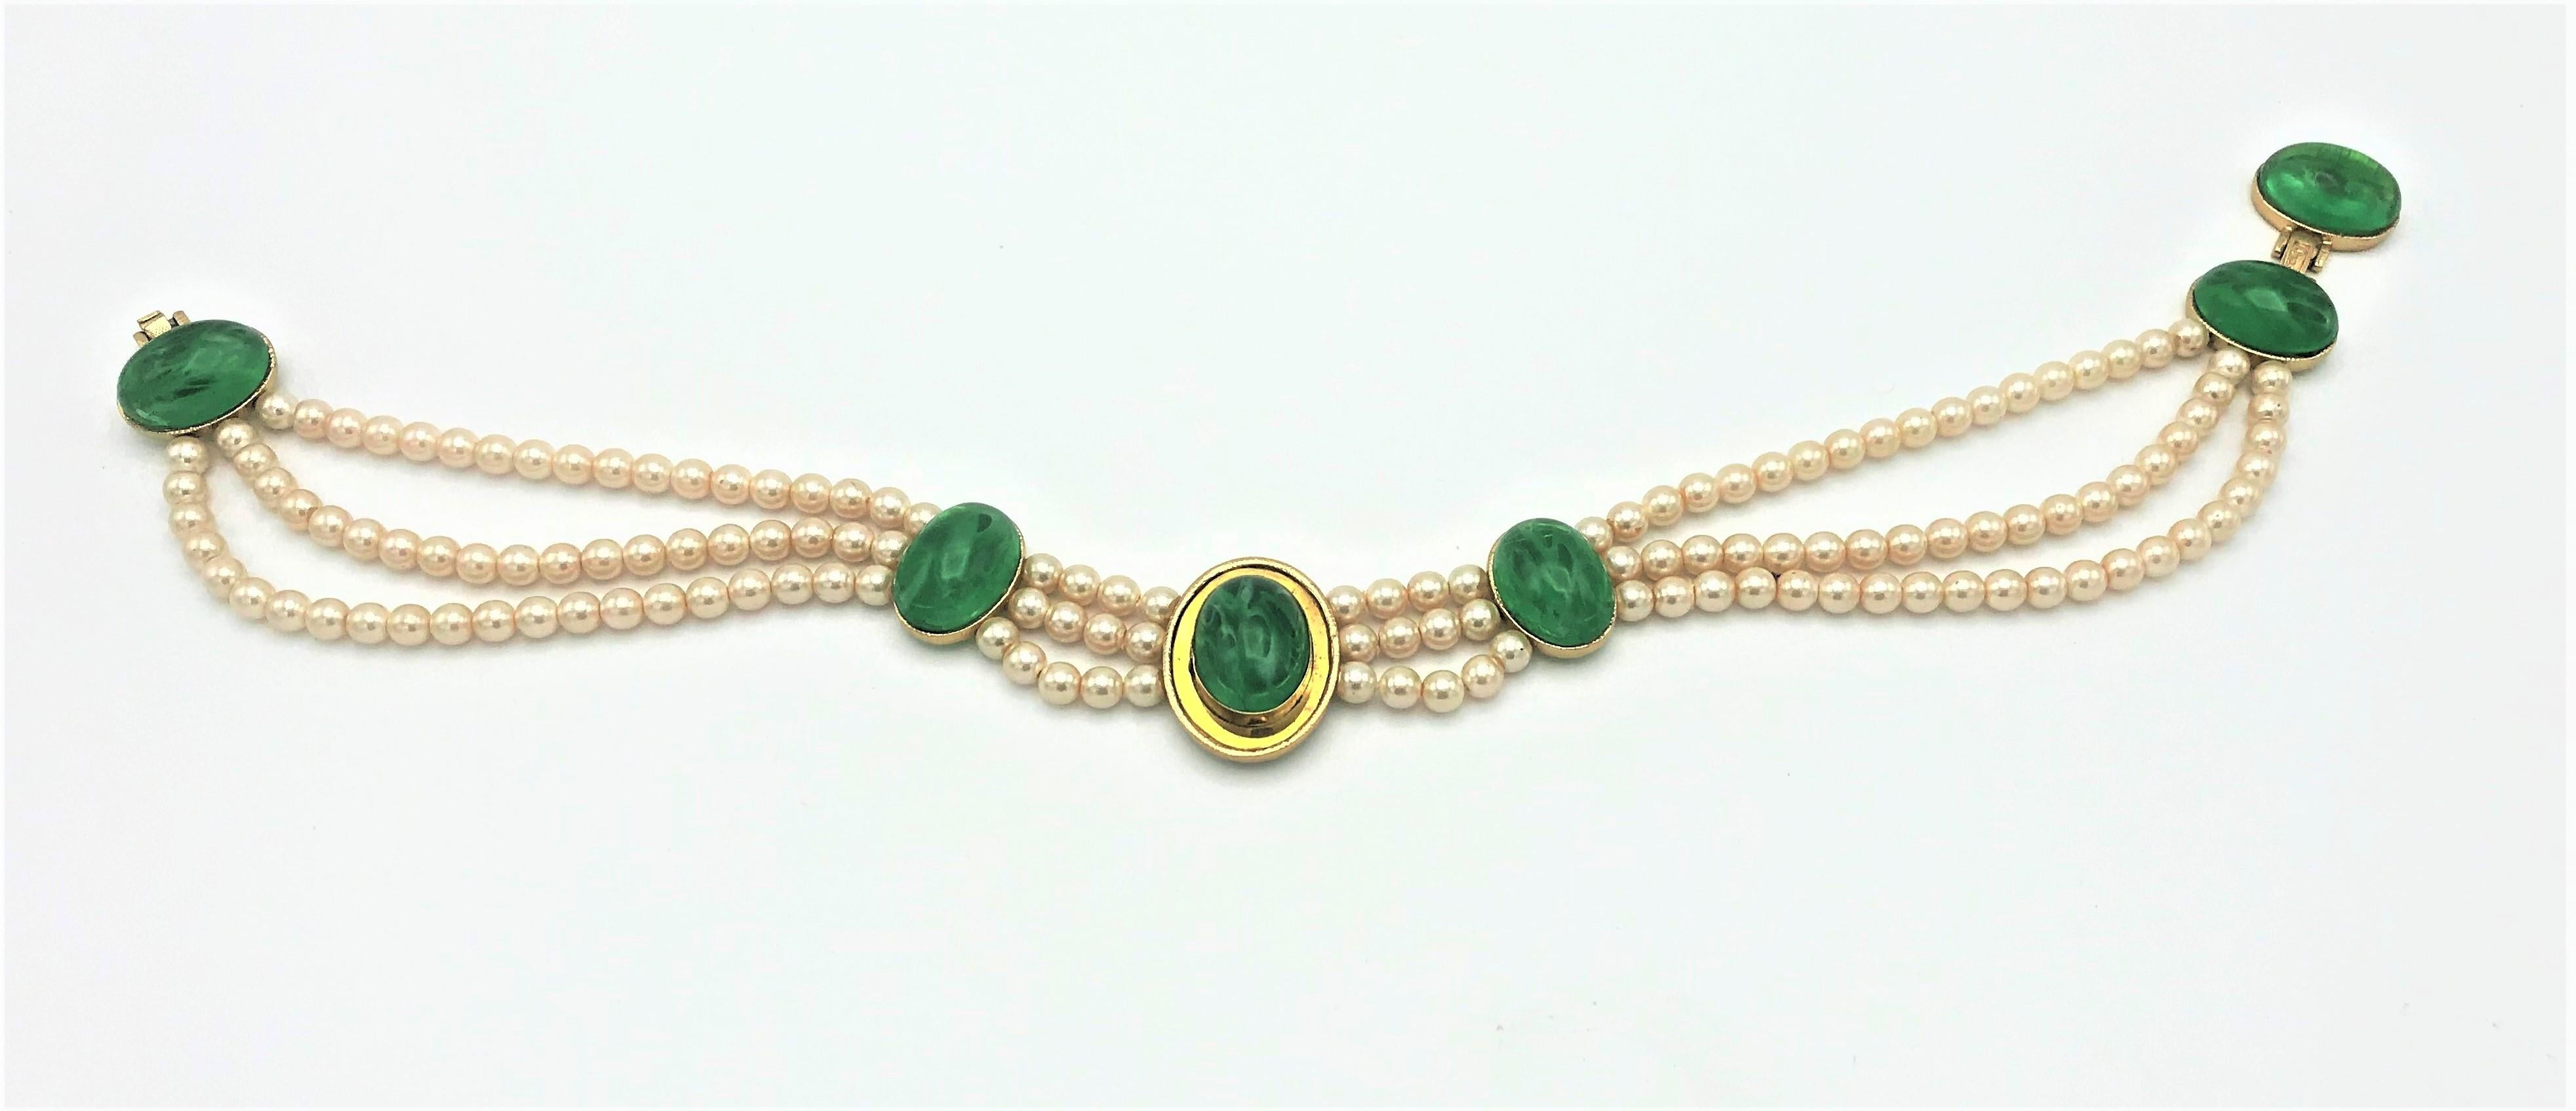 Elegant and rare Christian Dior necklace circa 1970s-1980s signed twice. 
Consisting of a triple row of fine Gripoix pearls (0,8 cm diameter) adorned with emerald cabochons (2,5 cm x 1,7 cm)
The green Gripoix glass is lightly marbleized for a rich